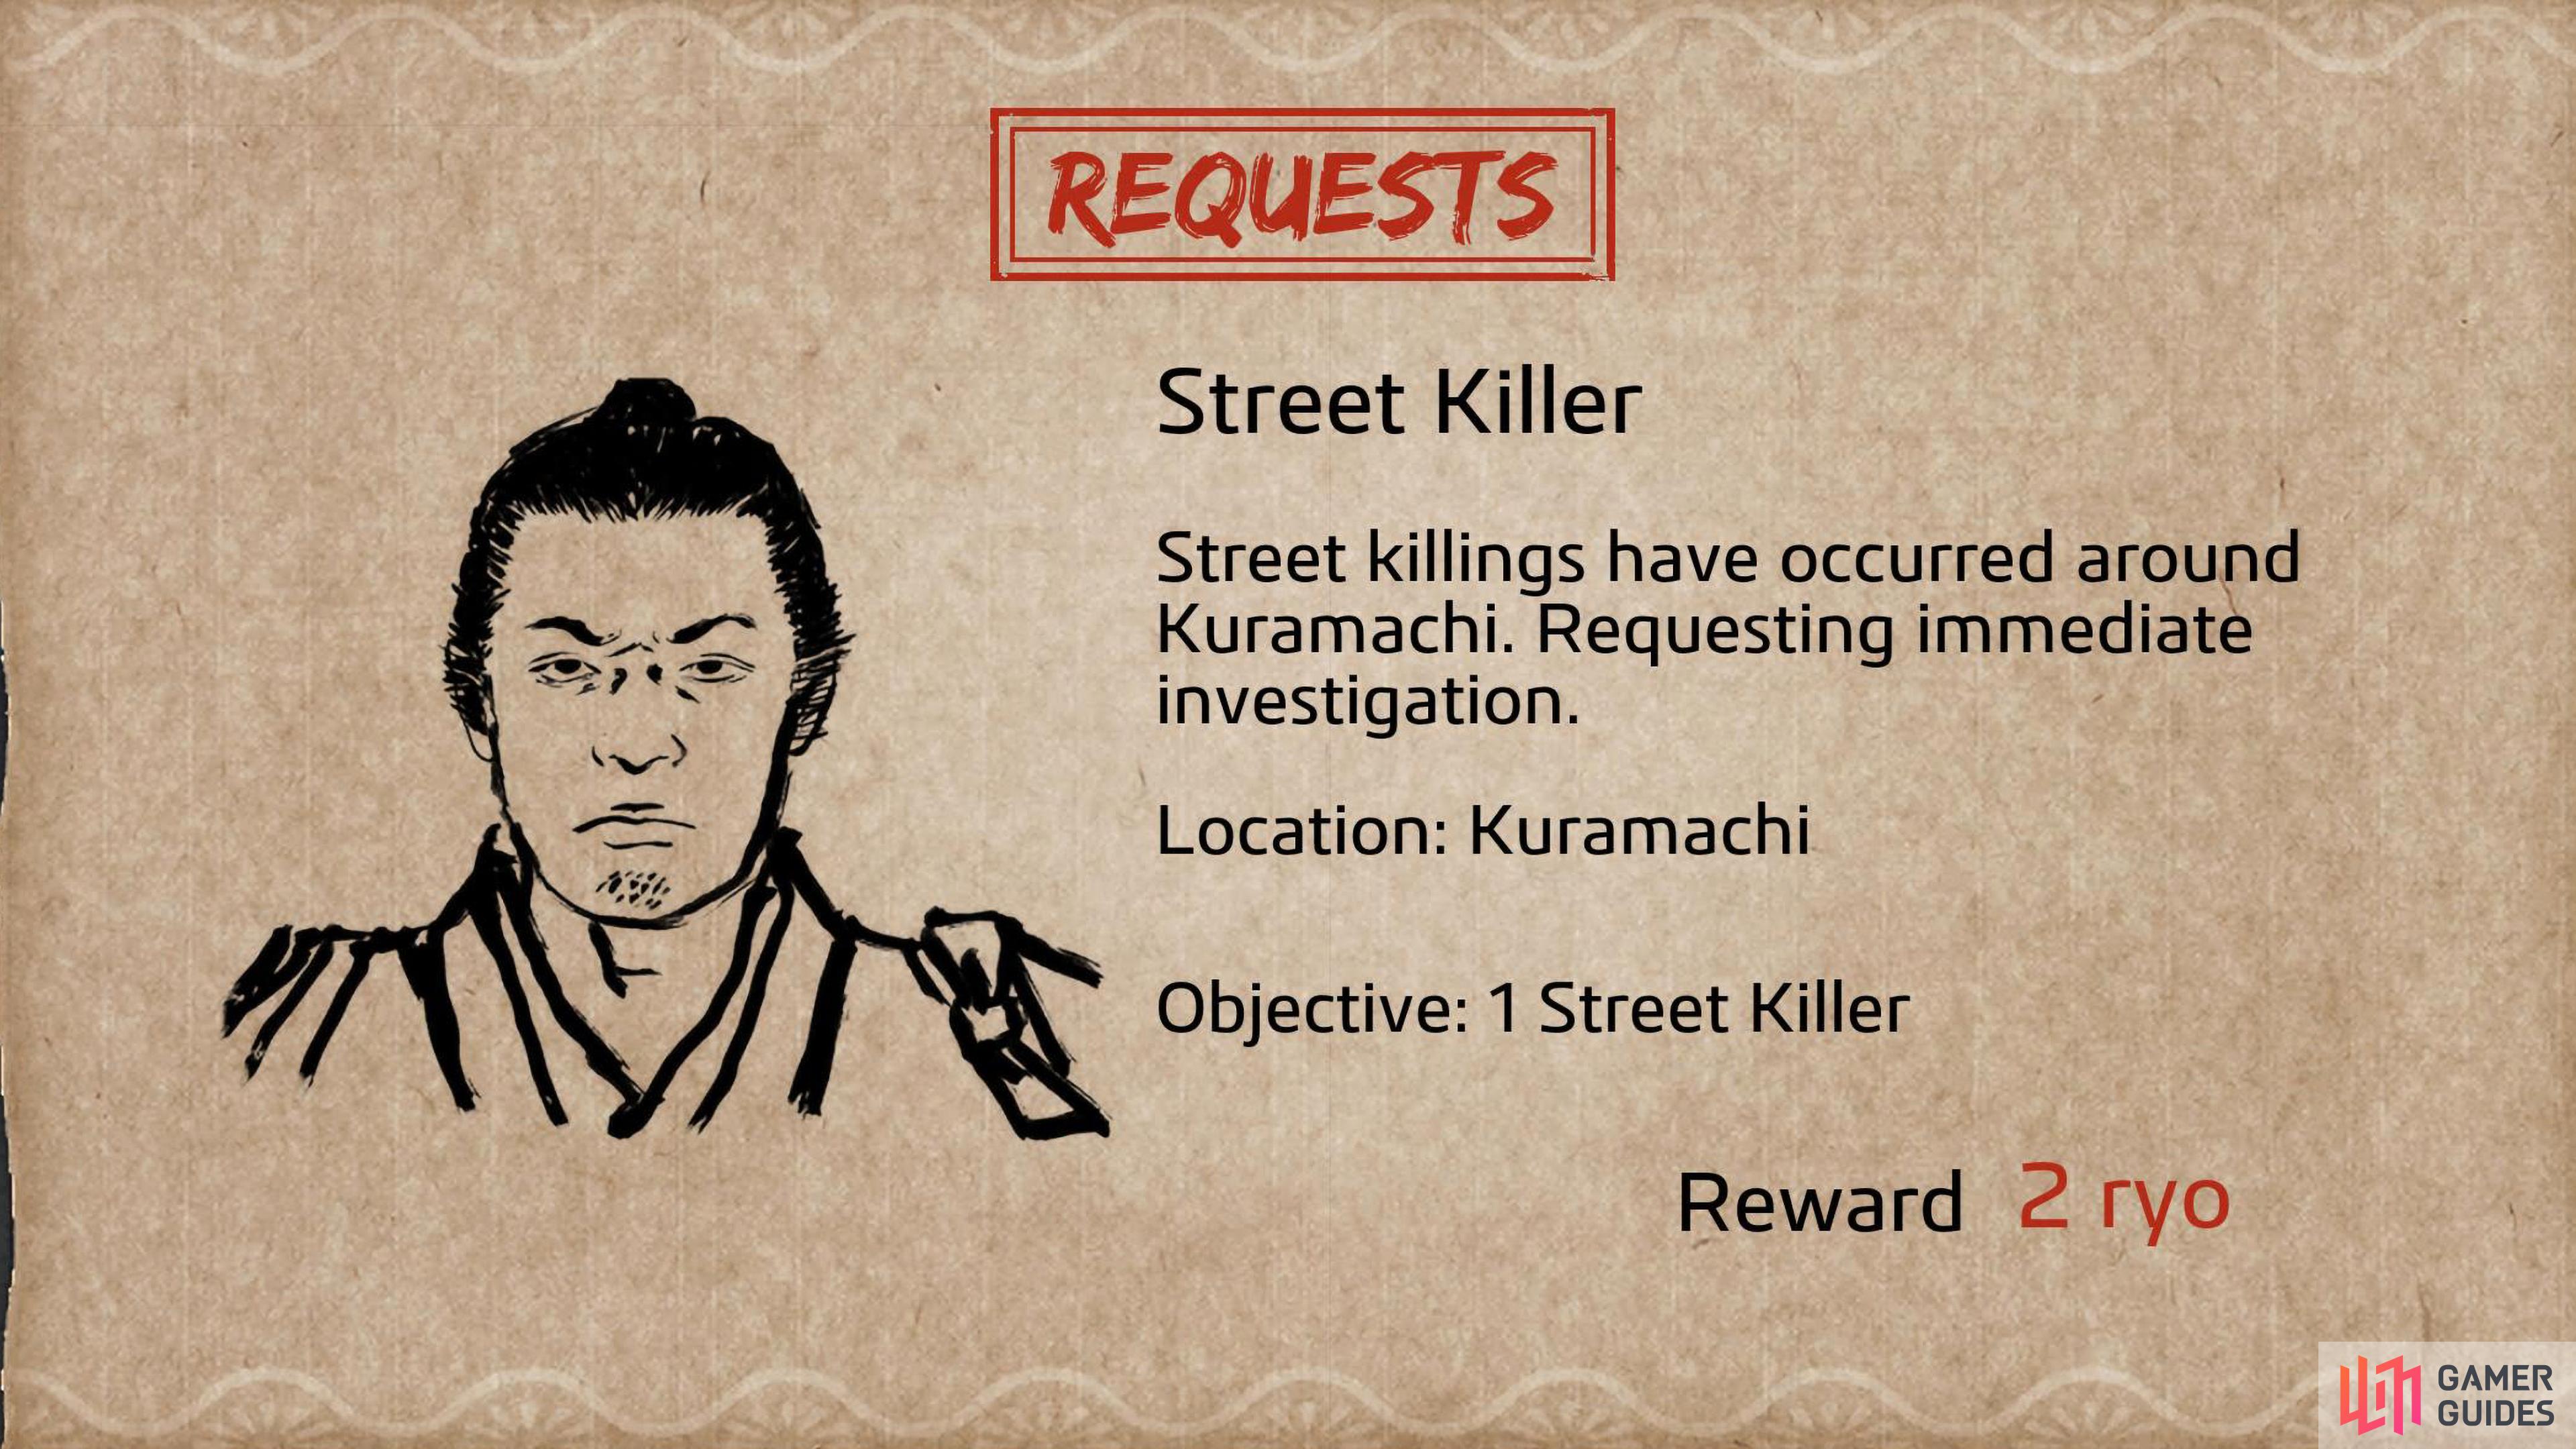 The Street Killer will be either your third or fourth Wanted Men Request.